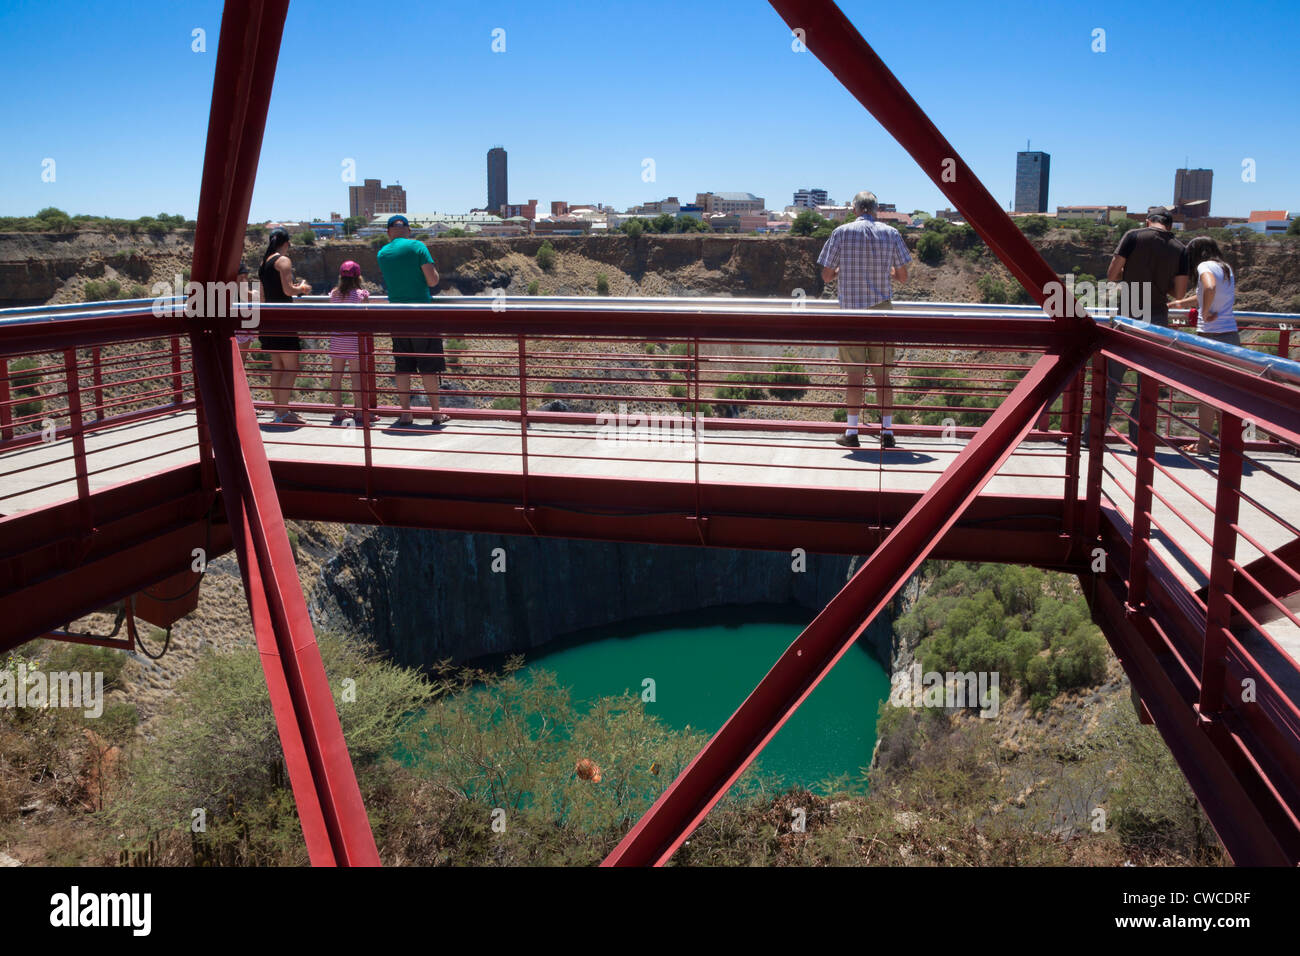 Big Hole, remains of diamond mining, Kimberley, Northern Cape, South Africa, Stock Photo